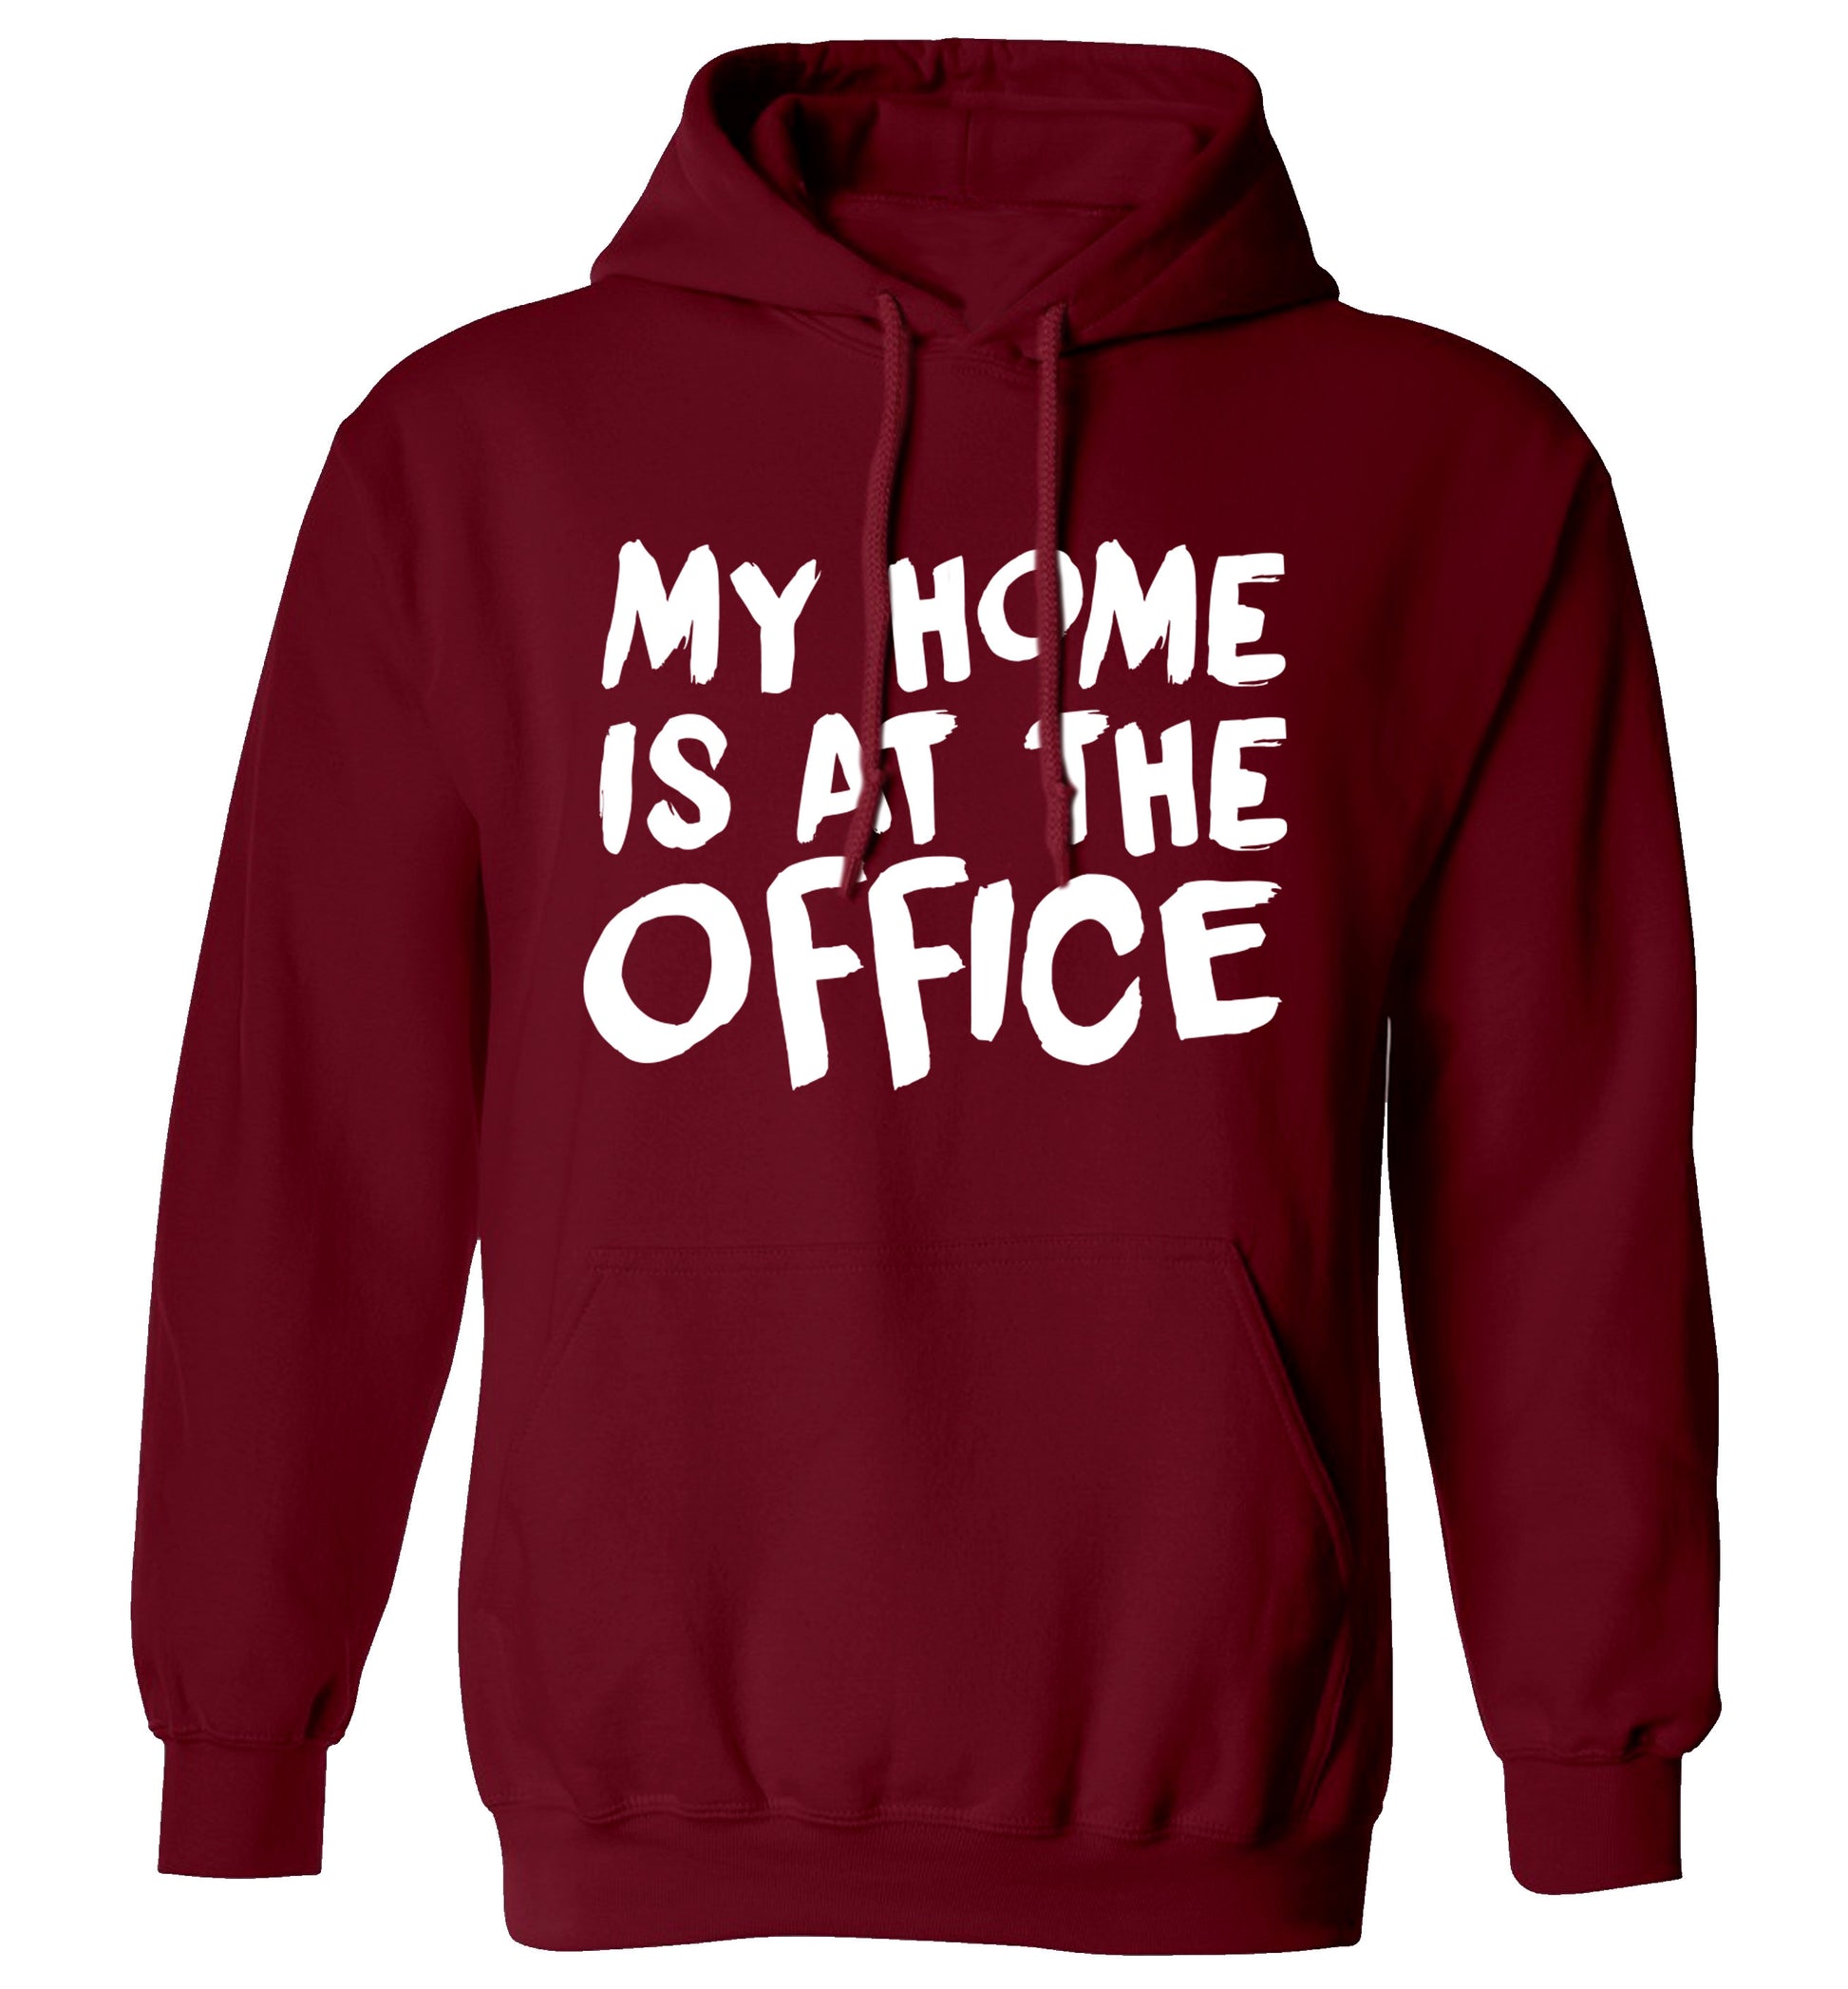 My home is at the office adults unisex maroon hoodie 2XL